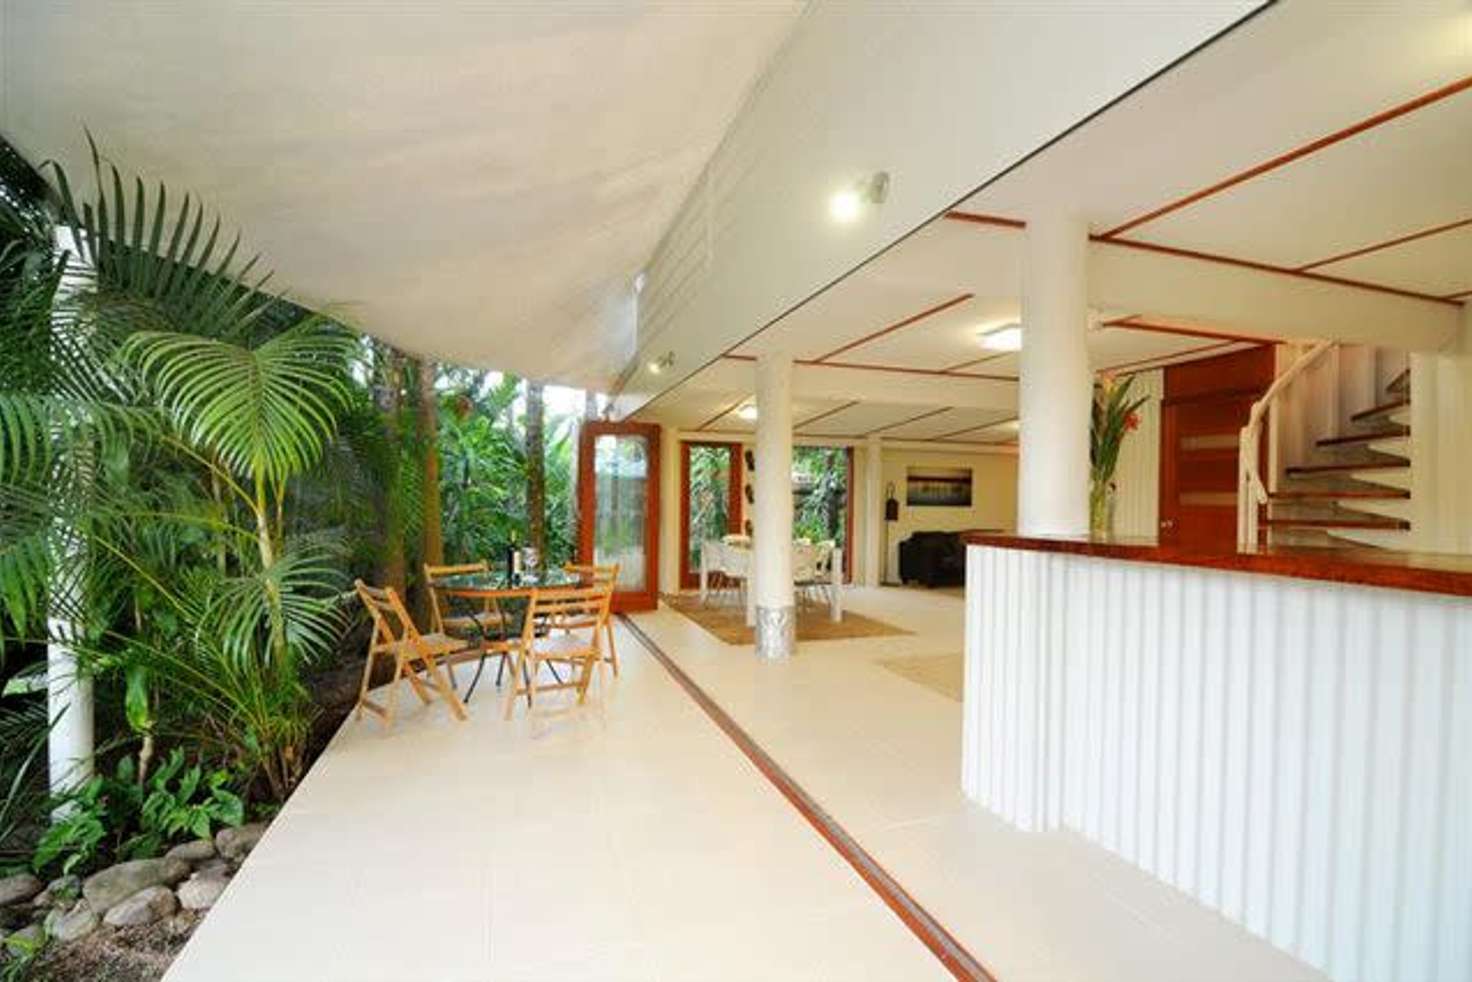 Main view of Homely house listing, 1 Poinciana Street, Cooya Beach QLD 4873